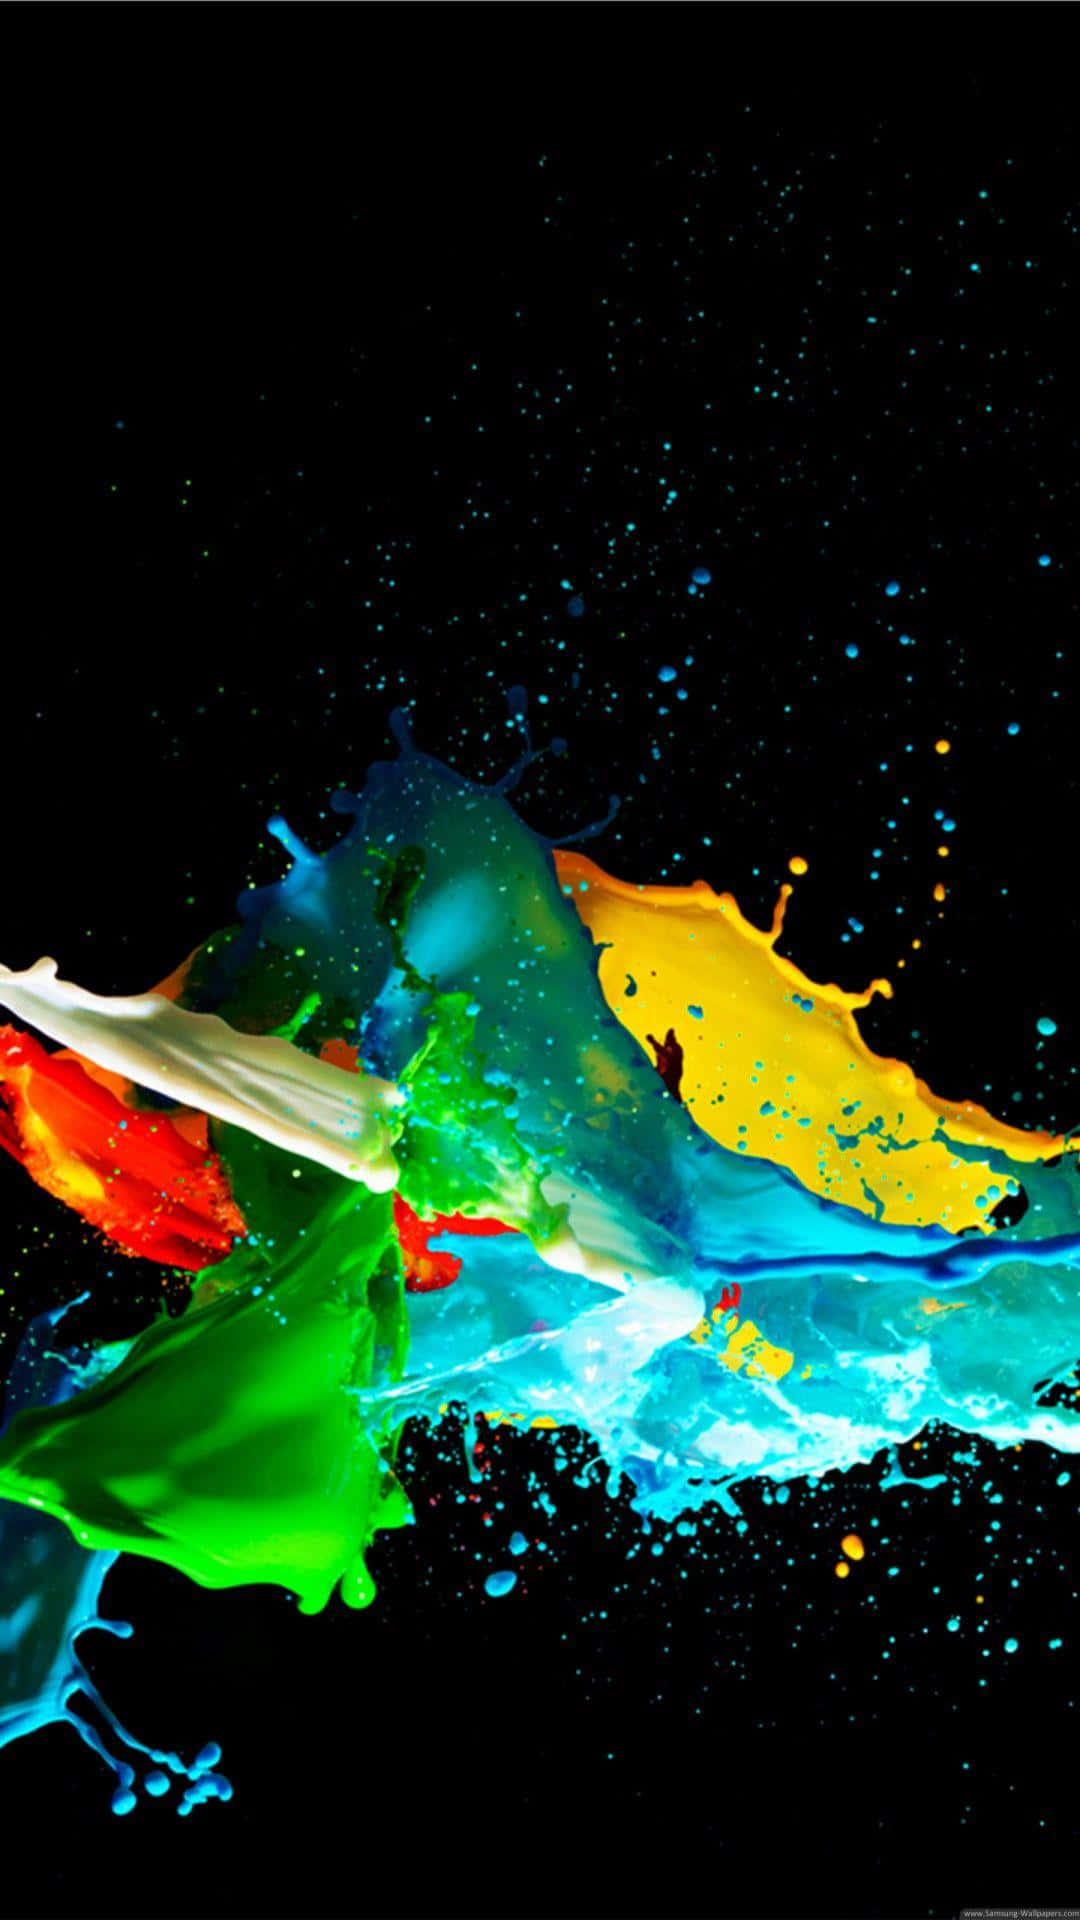 “Experience Colors like Never Before with Vibrant Super AMOLED” Wallpaper